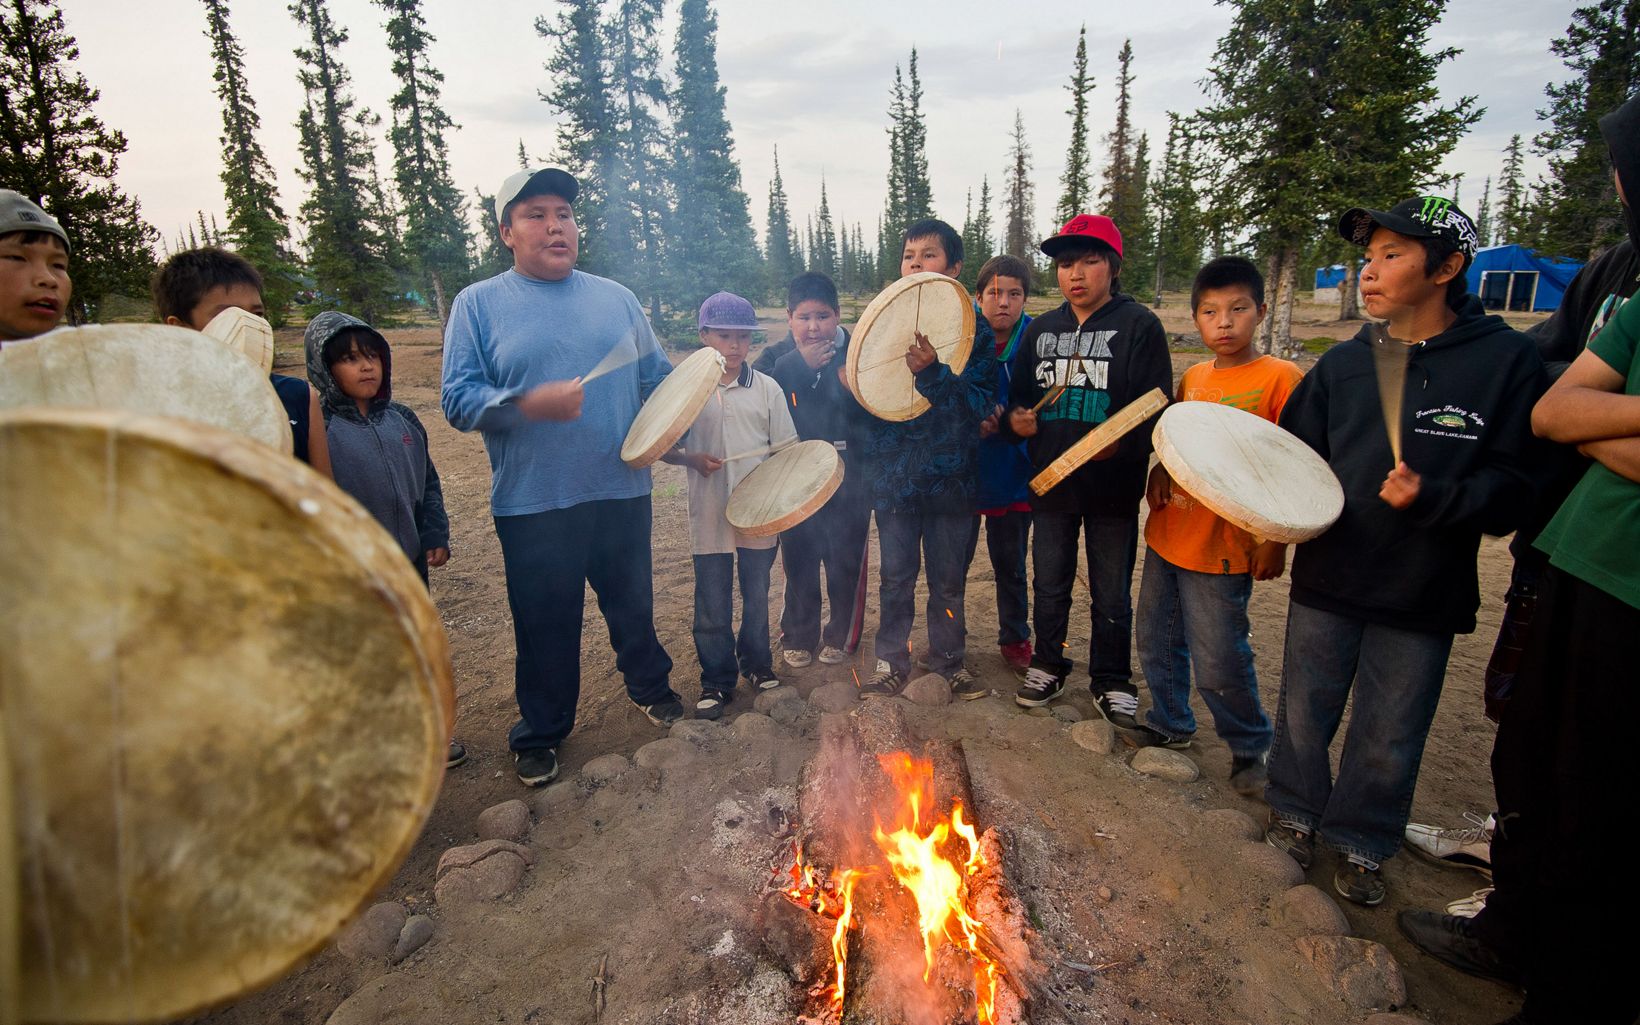 The Place Where God Began Dene First Nation youth beat drums around a fire during a spiritual gathering after returning from a canoe trip on the Upper Thelon River. © Ami Vitale